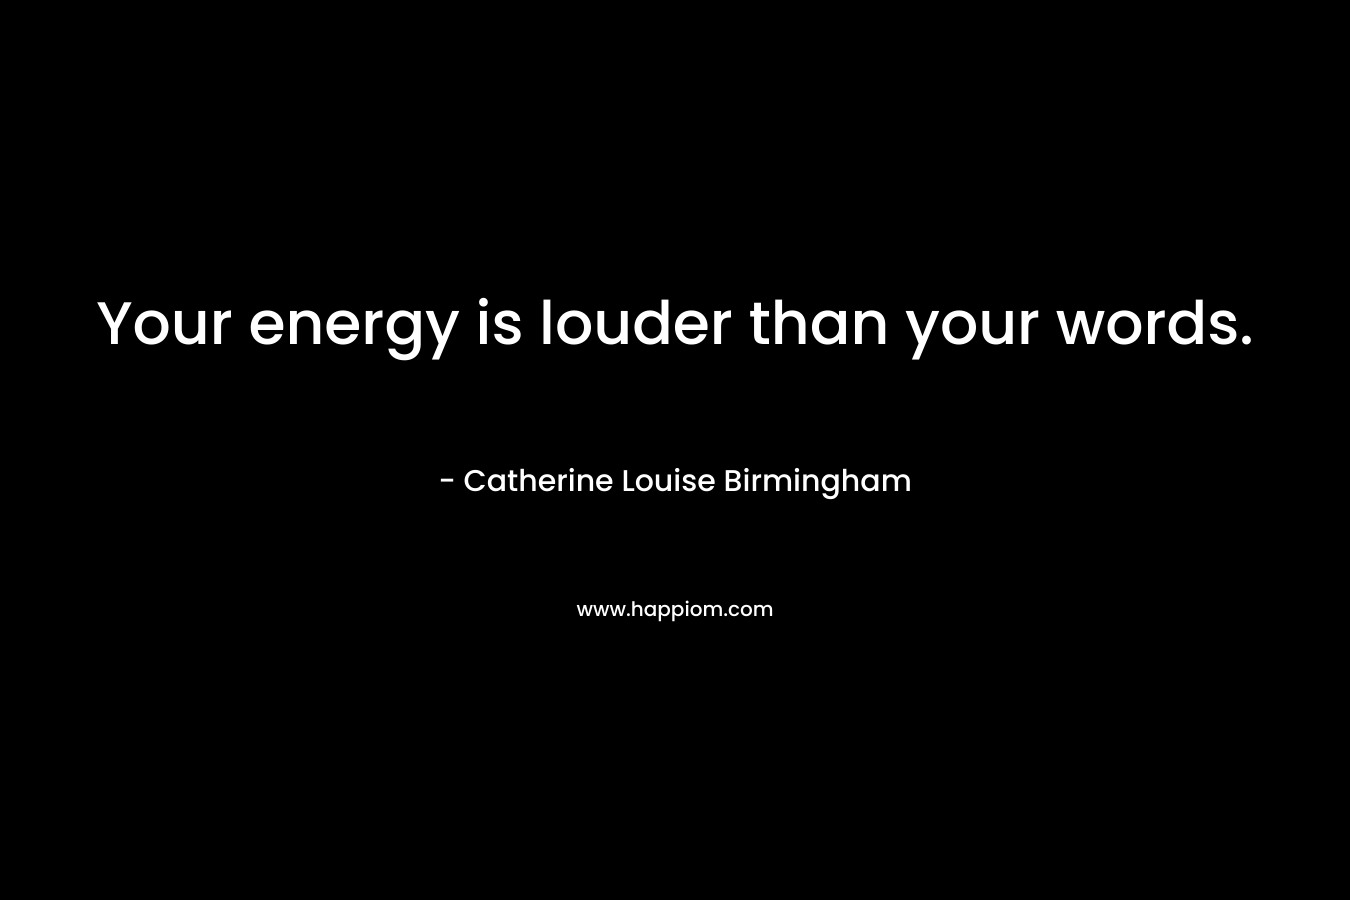 Your energy is louder than your words. – Catherine Louise Birmingham